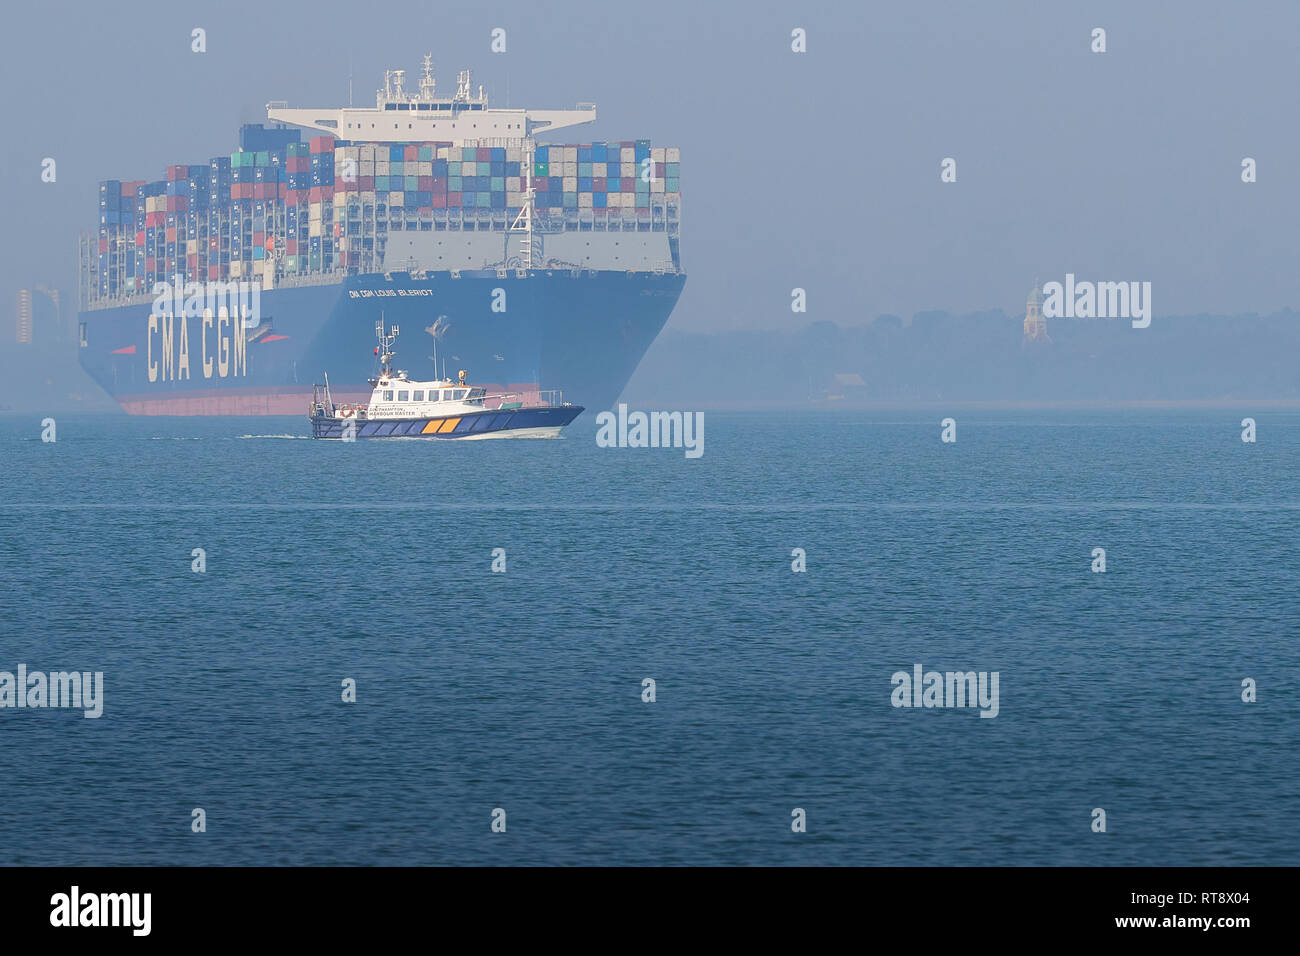 The 400 metre, Ultra-Large Container Ship, CMA CGM LOUIS BLERIOT, Departing The Port Of Southampton, A Waiting Pilot Launch In The Foreground. UK. Stock Photo